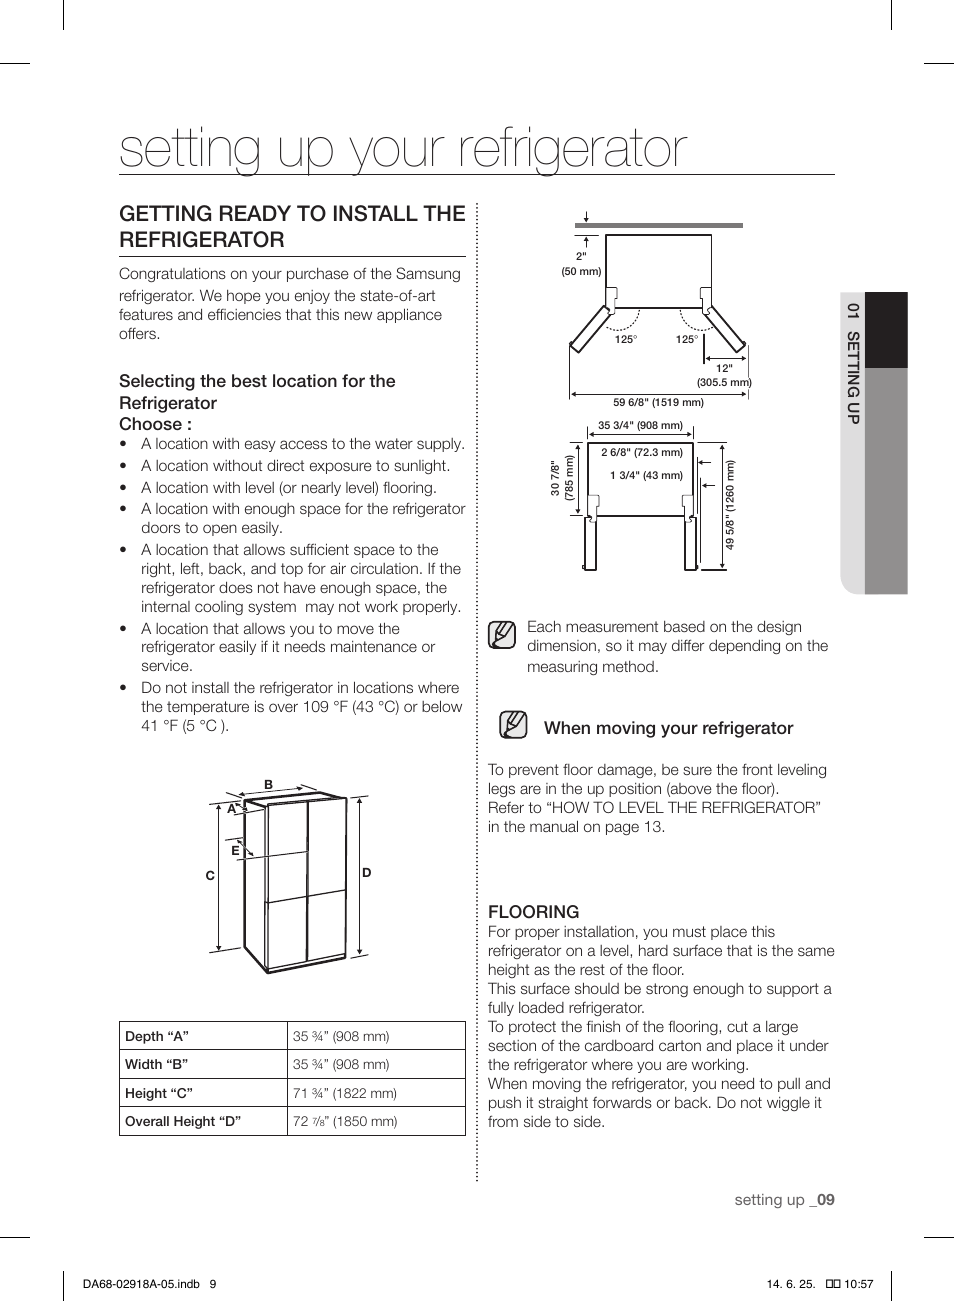 Setting up your refrigerator, Getting ready to install the refrigerator